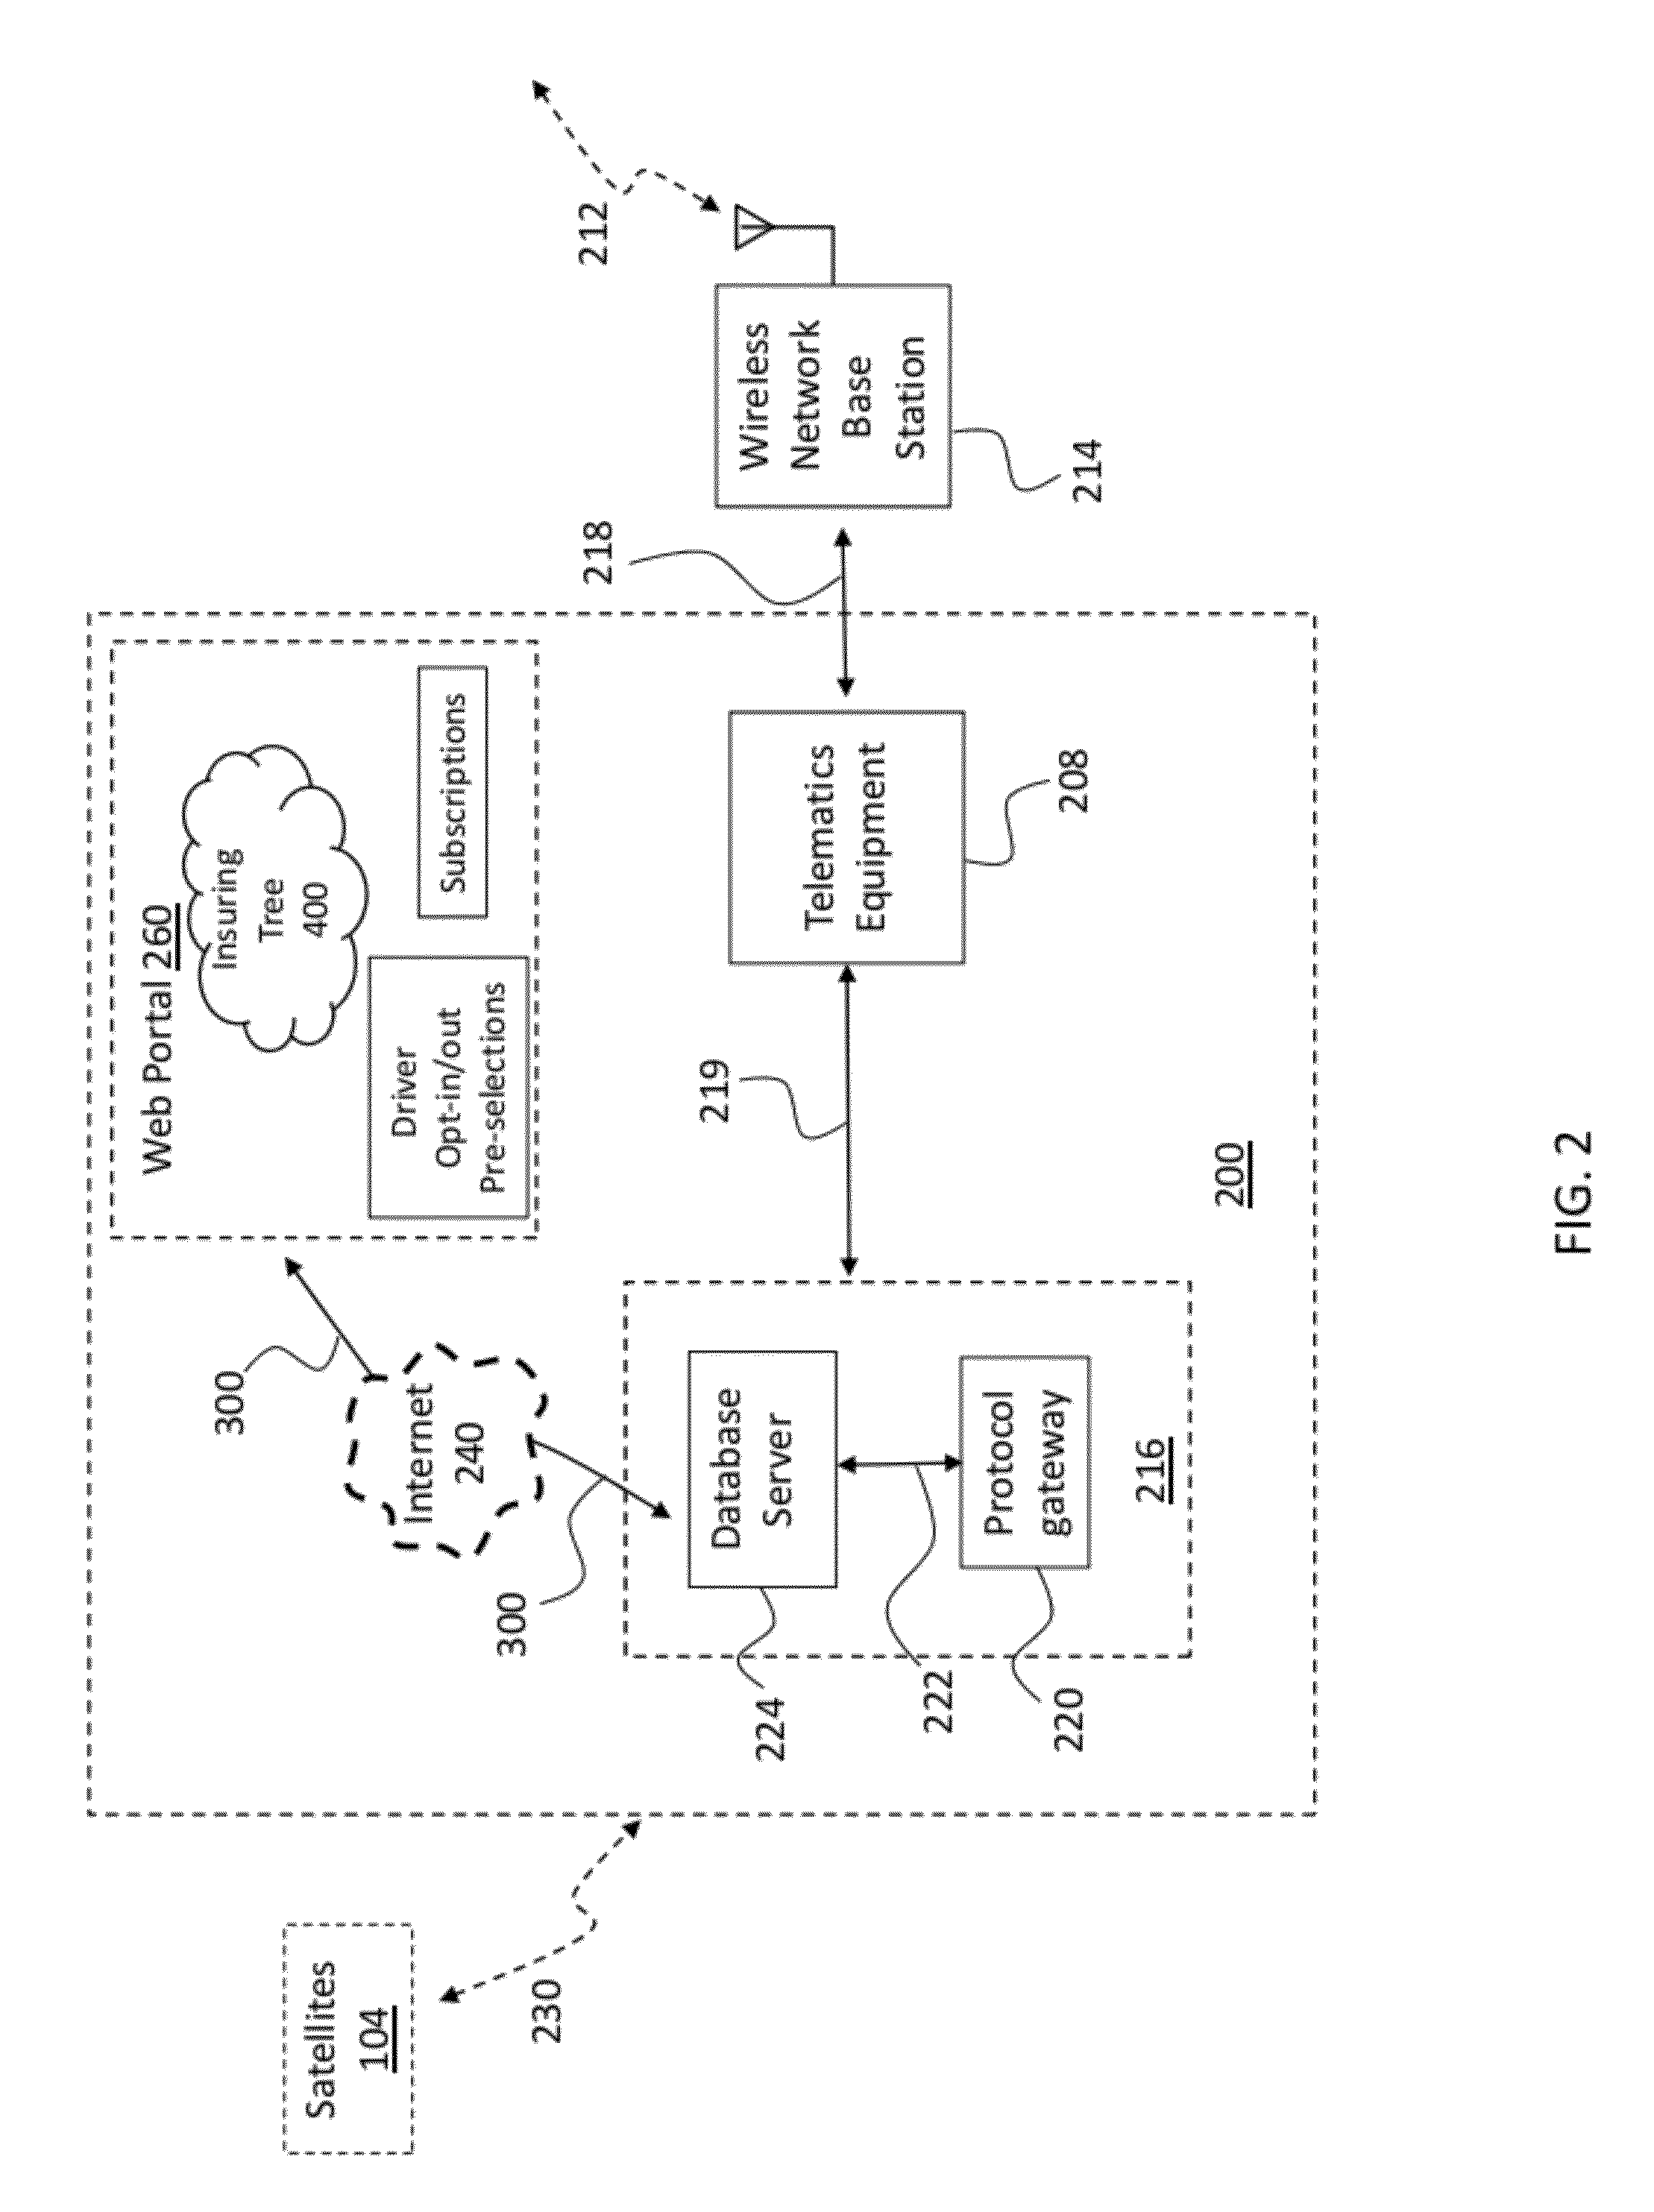 System and Method for Tracking and Sharing Driving Metrics with a Plurality of Insurance Carriers